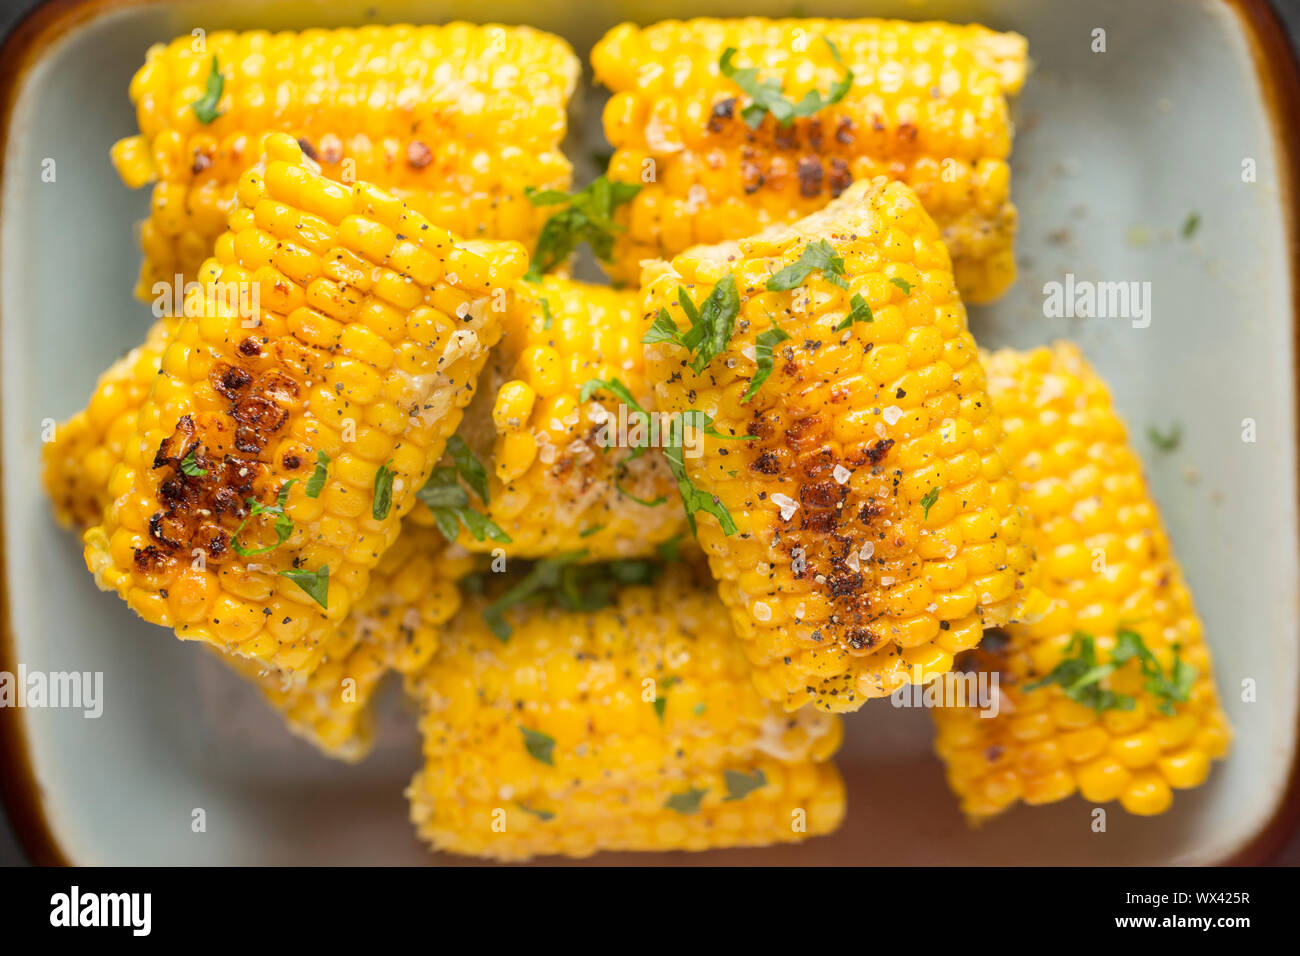 British corn on the cob that has been bought from a UK supermarket and simmered in milk, butter and vegetable stock. It has been seasoned with black p Stock Photo